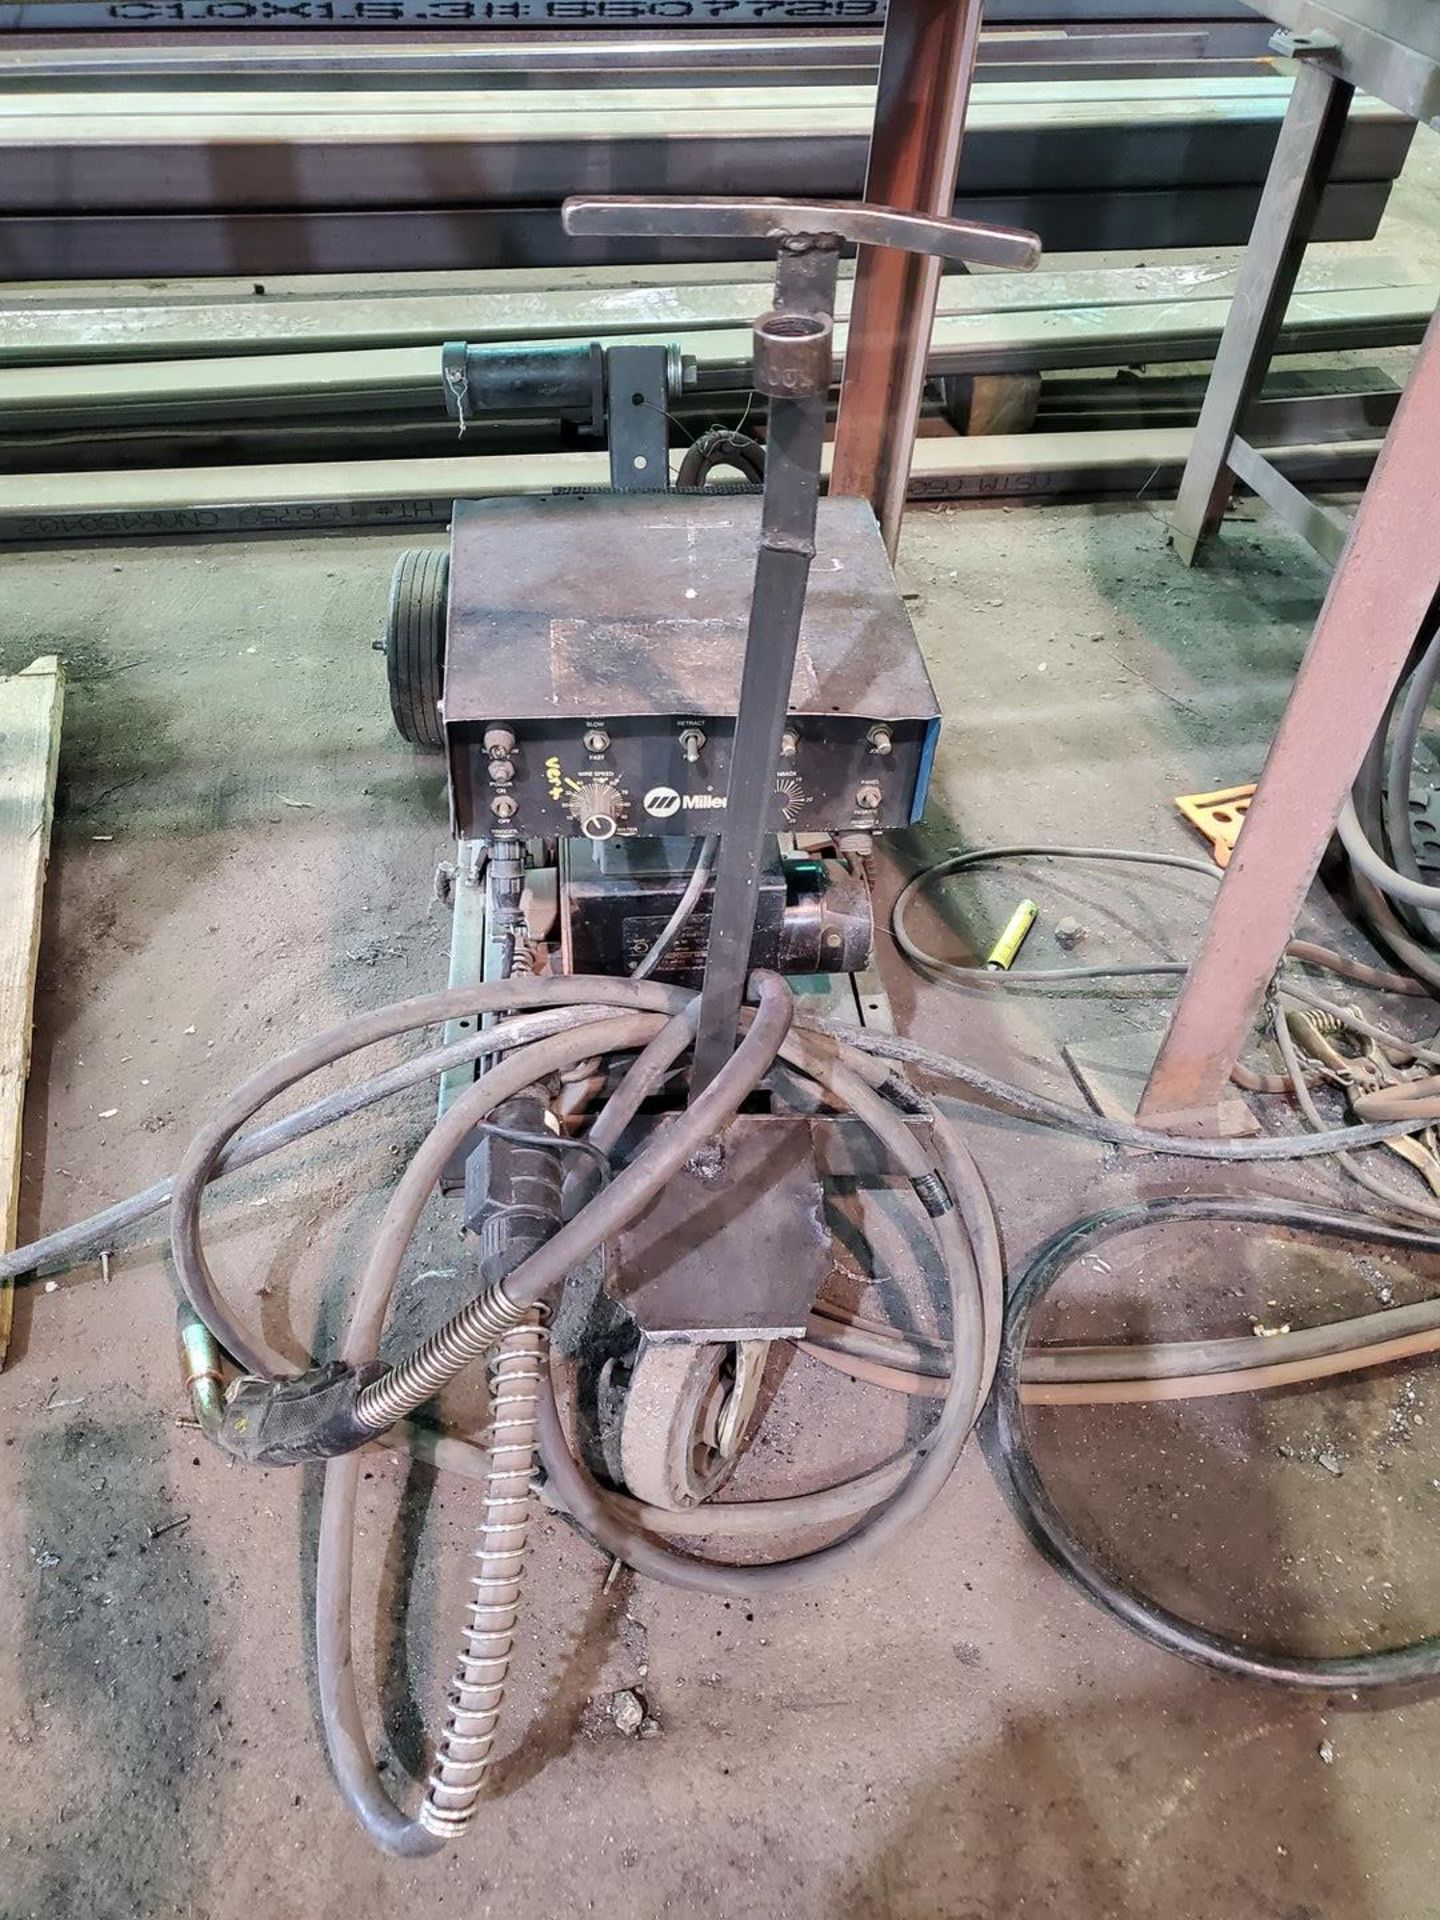 Miller A-CP-500-E Arc Welder 230/460V, 70/35A,3PH, 50/60HZ; W/ S-54A Wire Feeder - Image 6 of 9